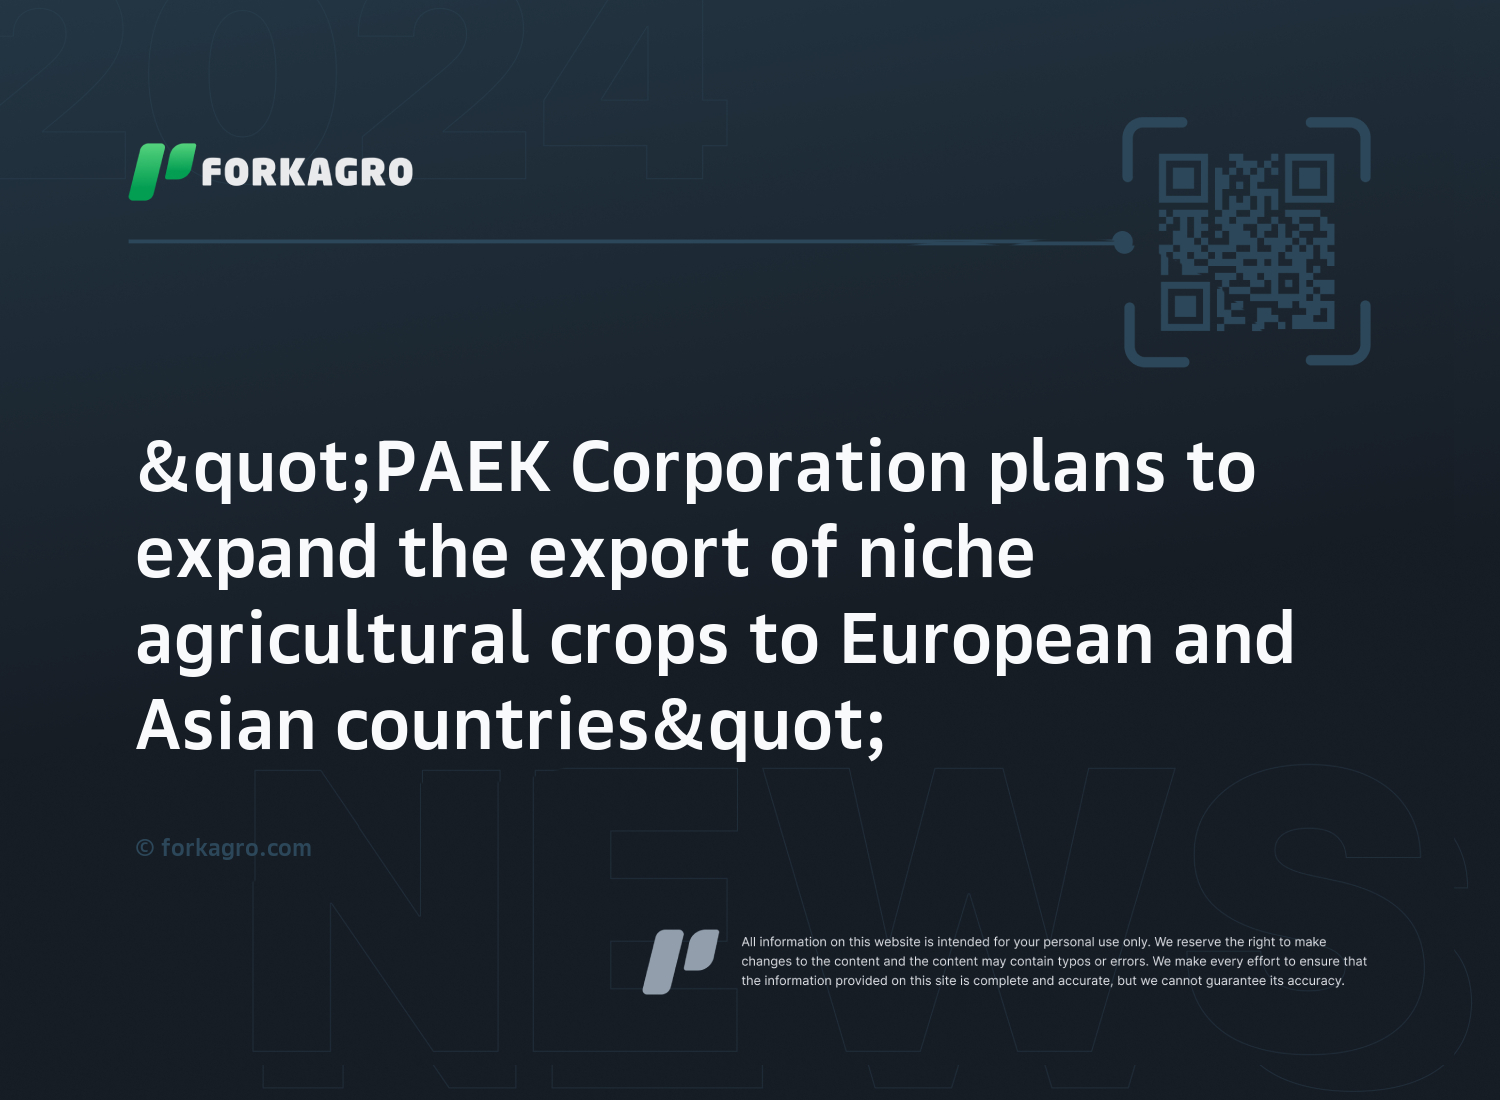 "PAEK Corporation plans to expand the export of niche agricultural crops to European and Asian countries"